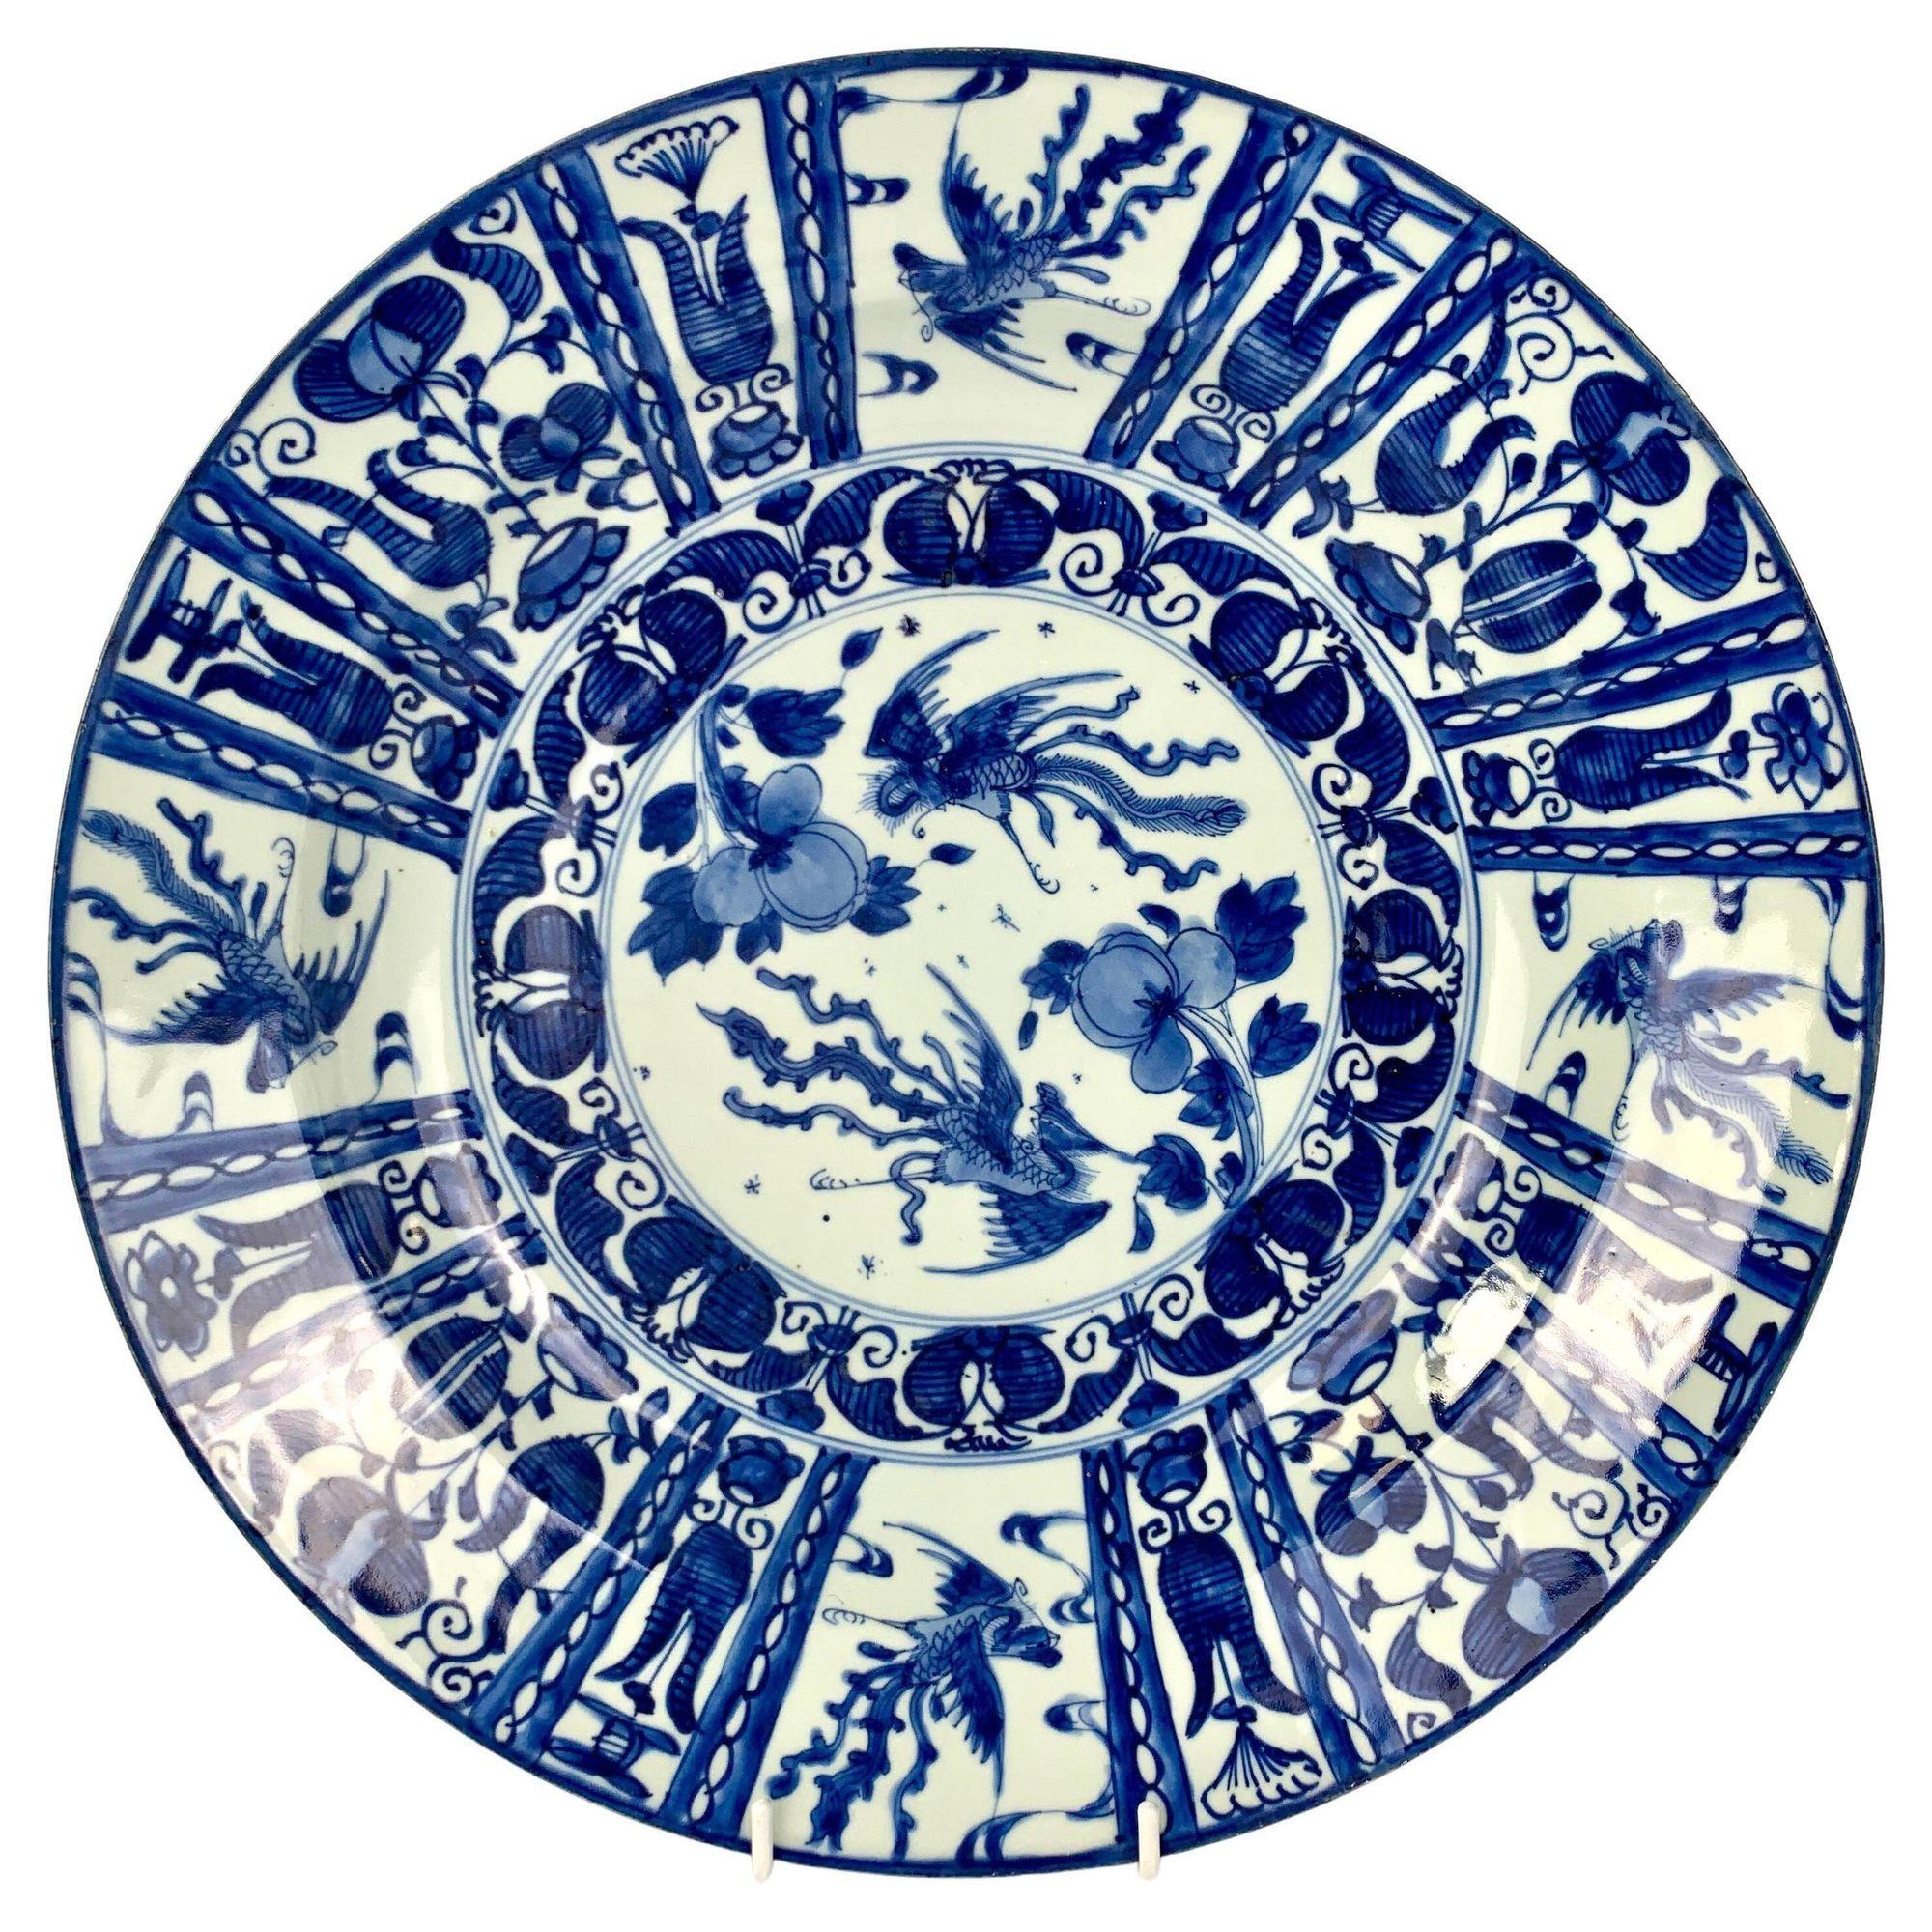 This pair of extraordinary chargers is hand-painted in a combination of beautifully soft and dark cobalt blue.
In the center, we see a pair of splendid phoenixes, a male and a female, chasing each other across the sky.
The male flies above with his